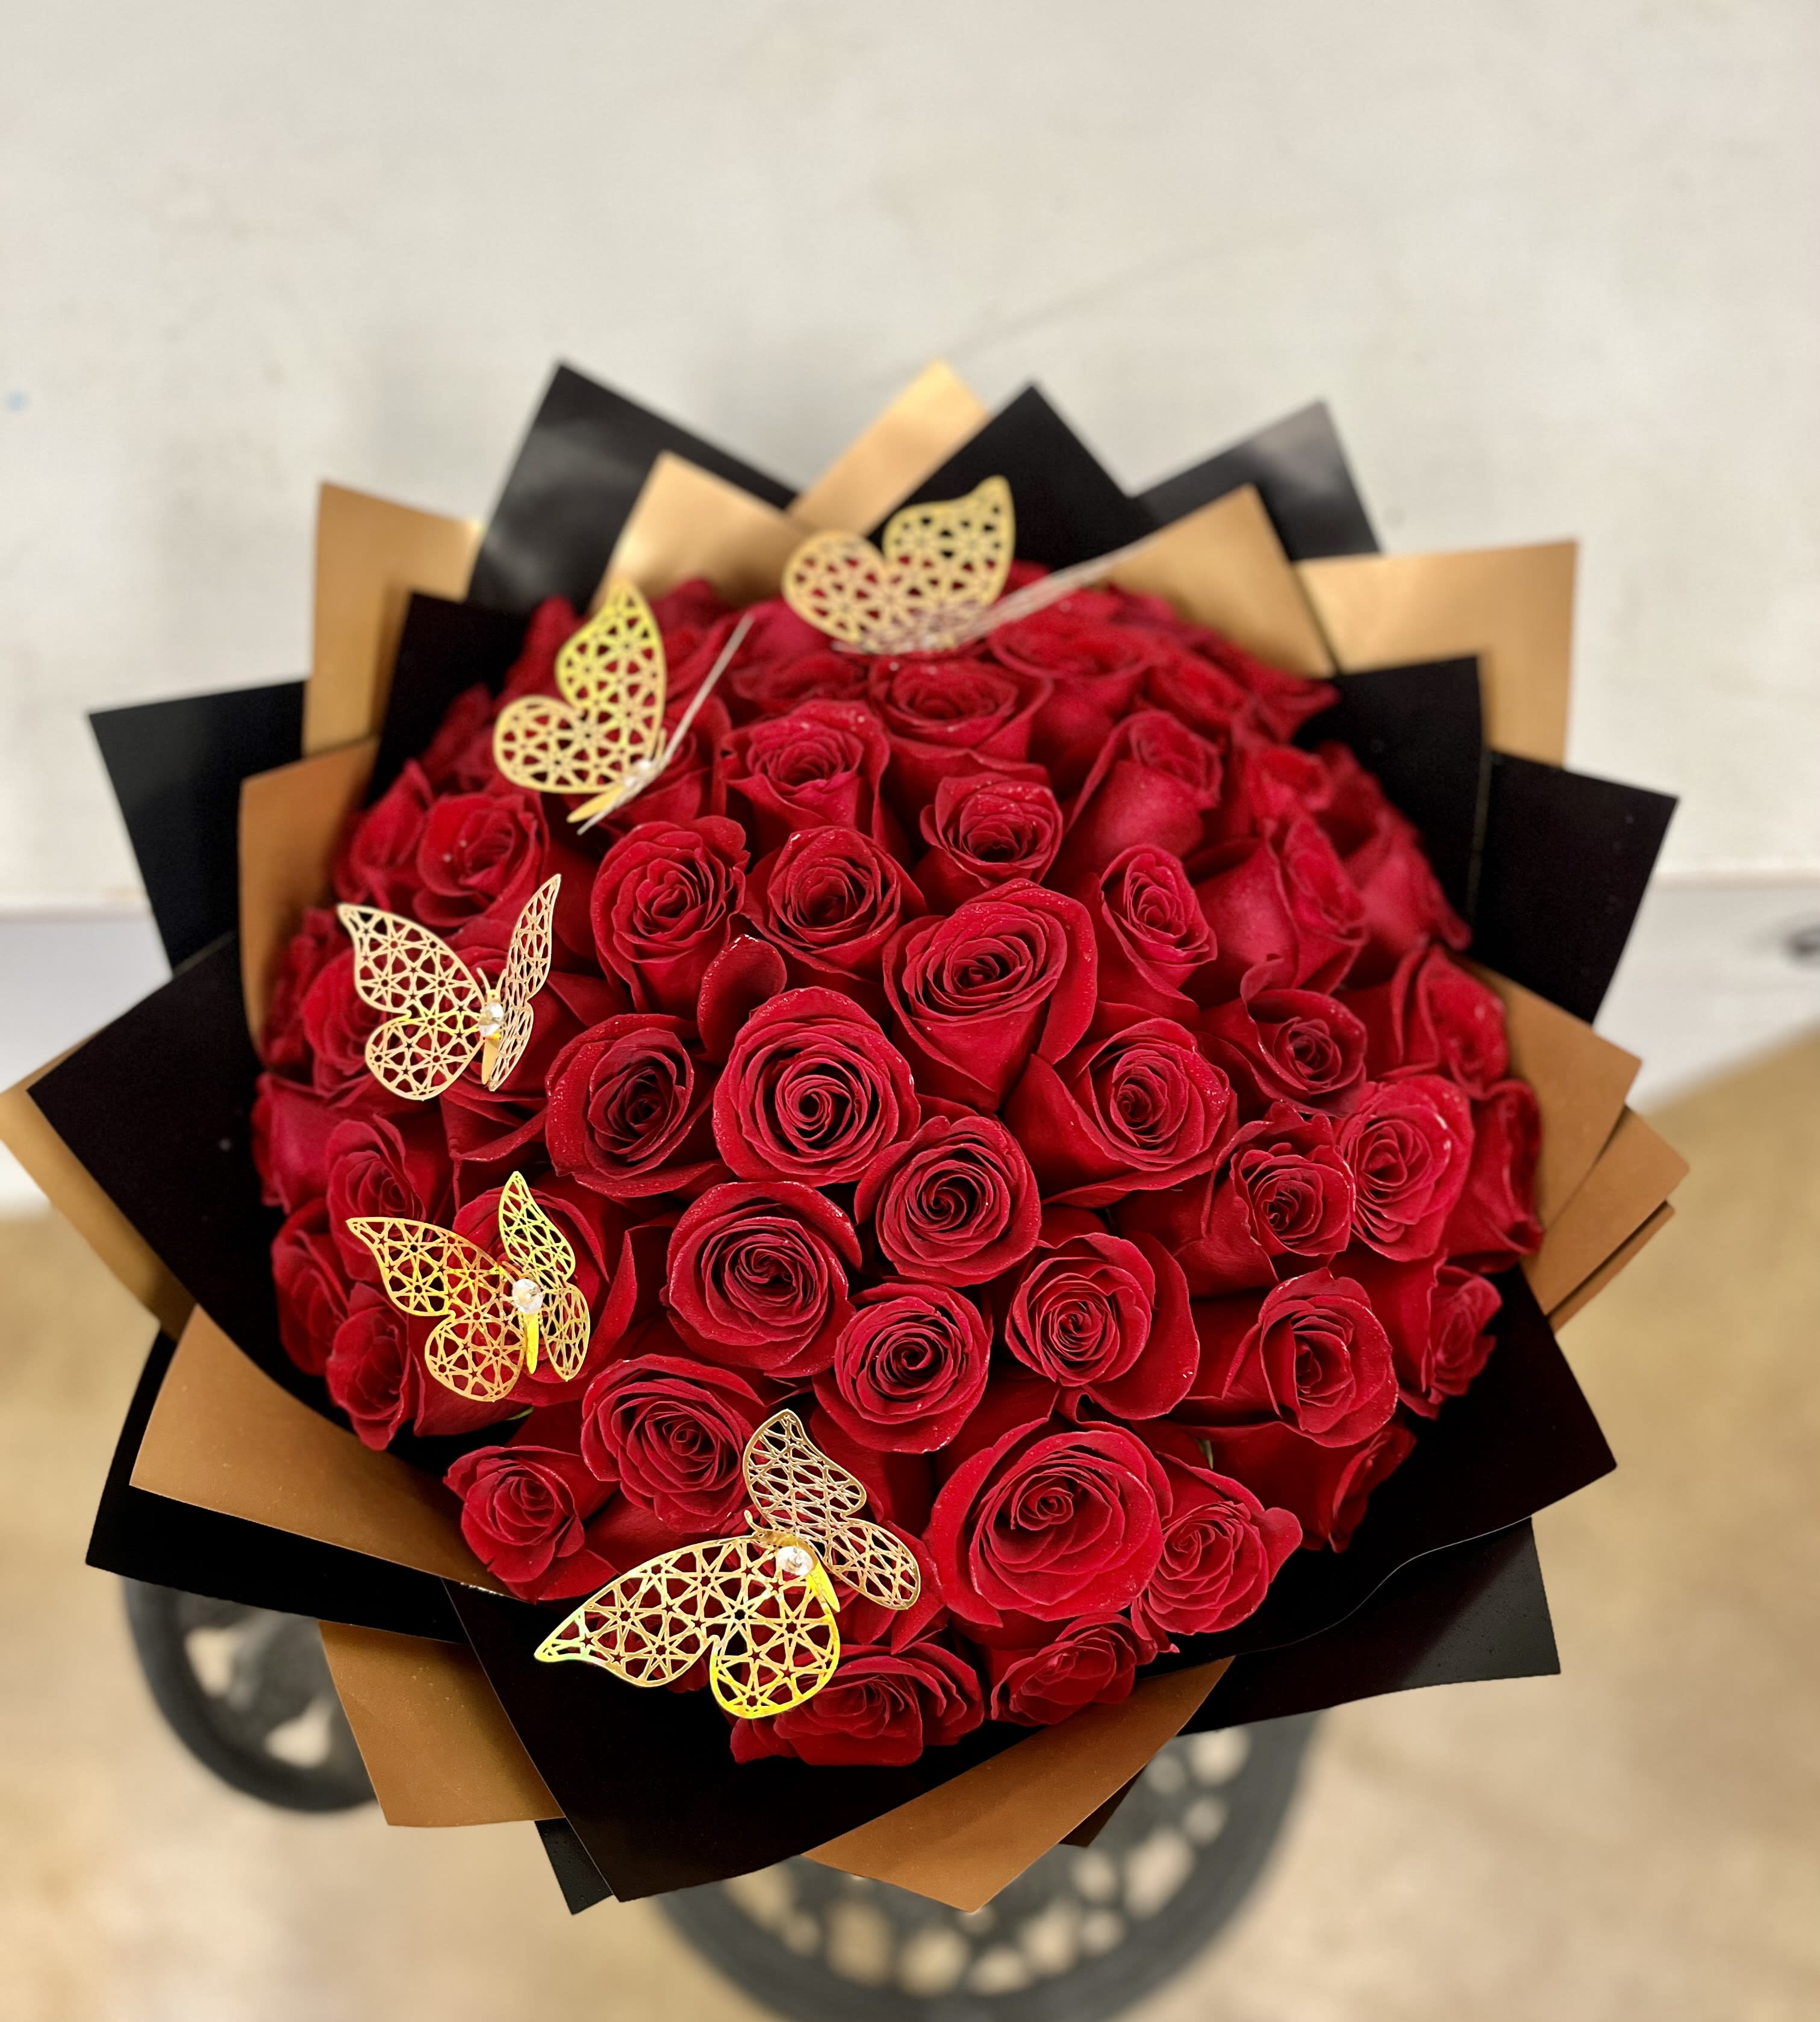 50 RED ROSE BOUQUET - The Rose Bouquet includes 50 long-stem red roses. Wrapped in black paper with a satin red bow. Includes butterflies and diamond pins. 